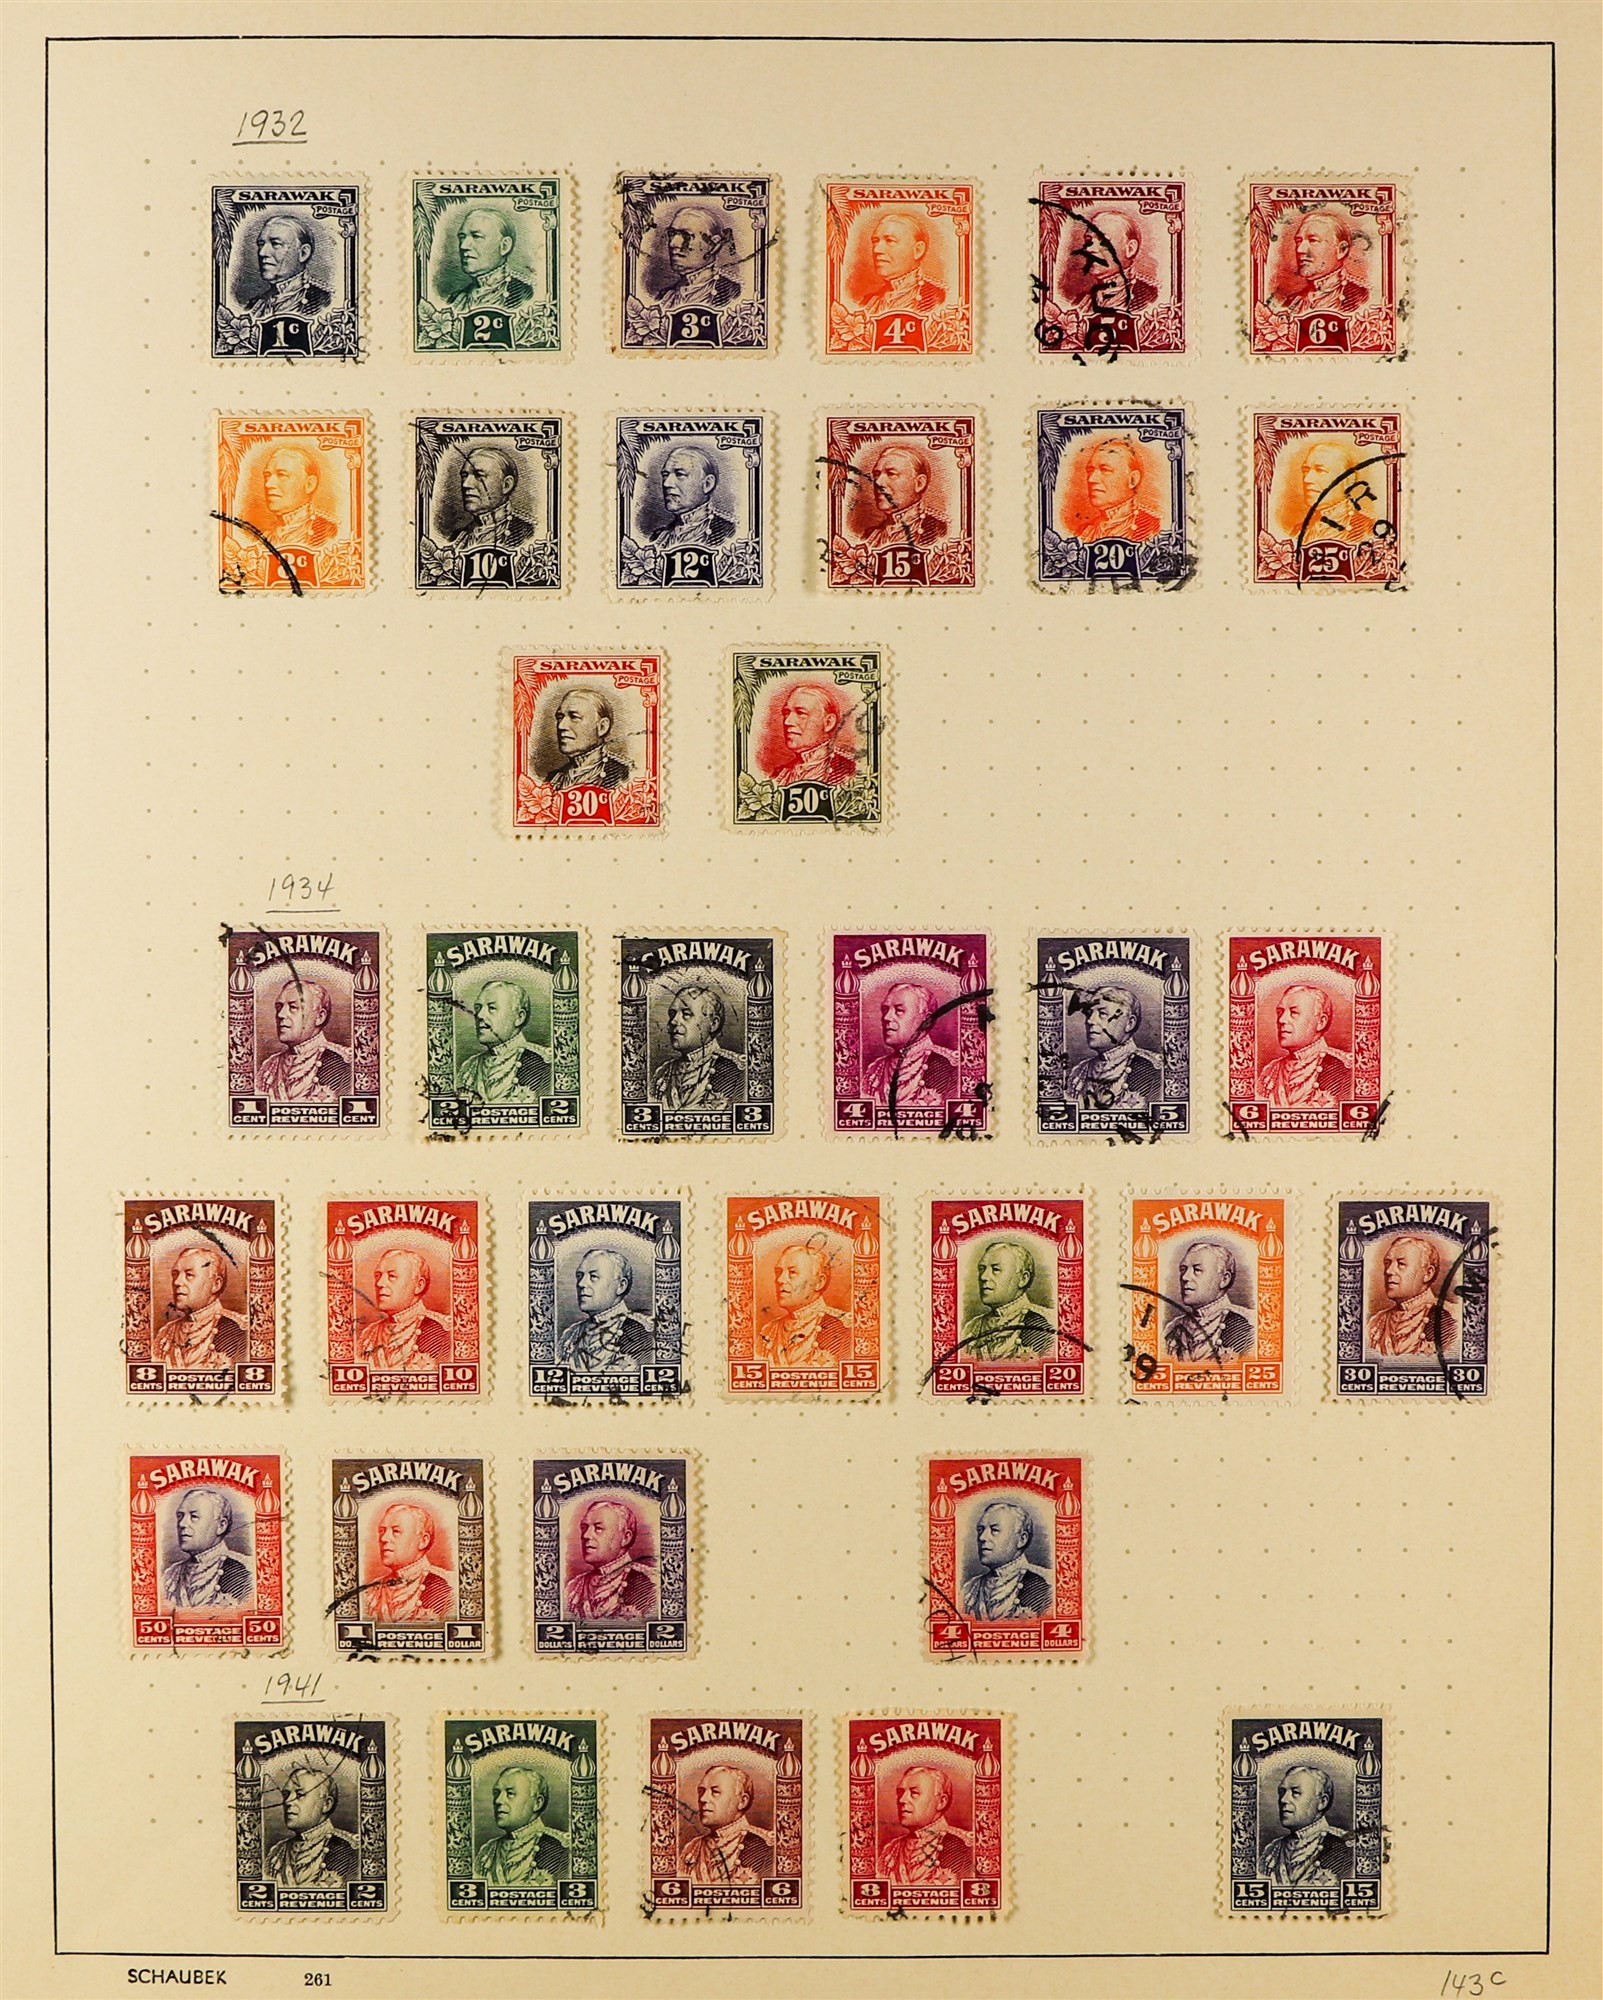 SARAWAK 1871 - 1934 COLLECTION of 100+ used stamps on old album pages incl. 1875 set (no 8c), 1888- - Image 4 of 4